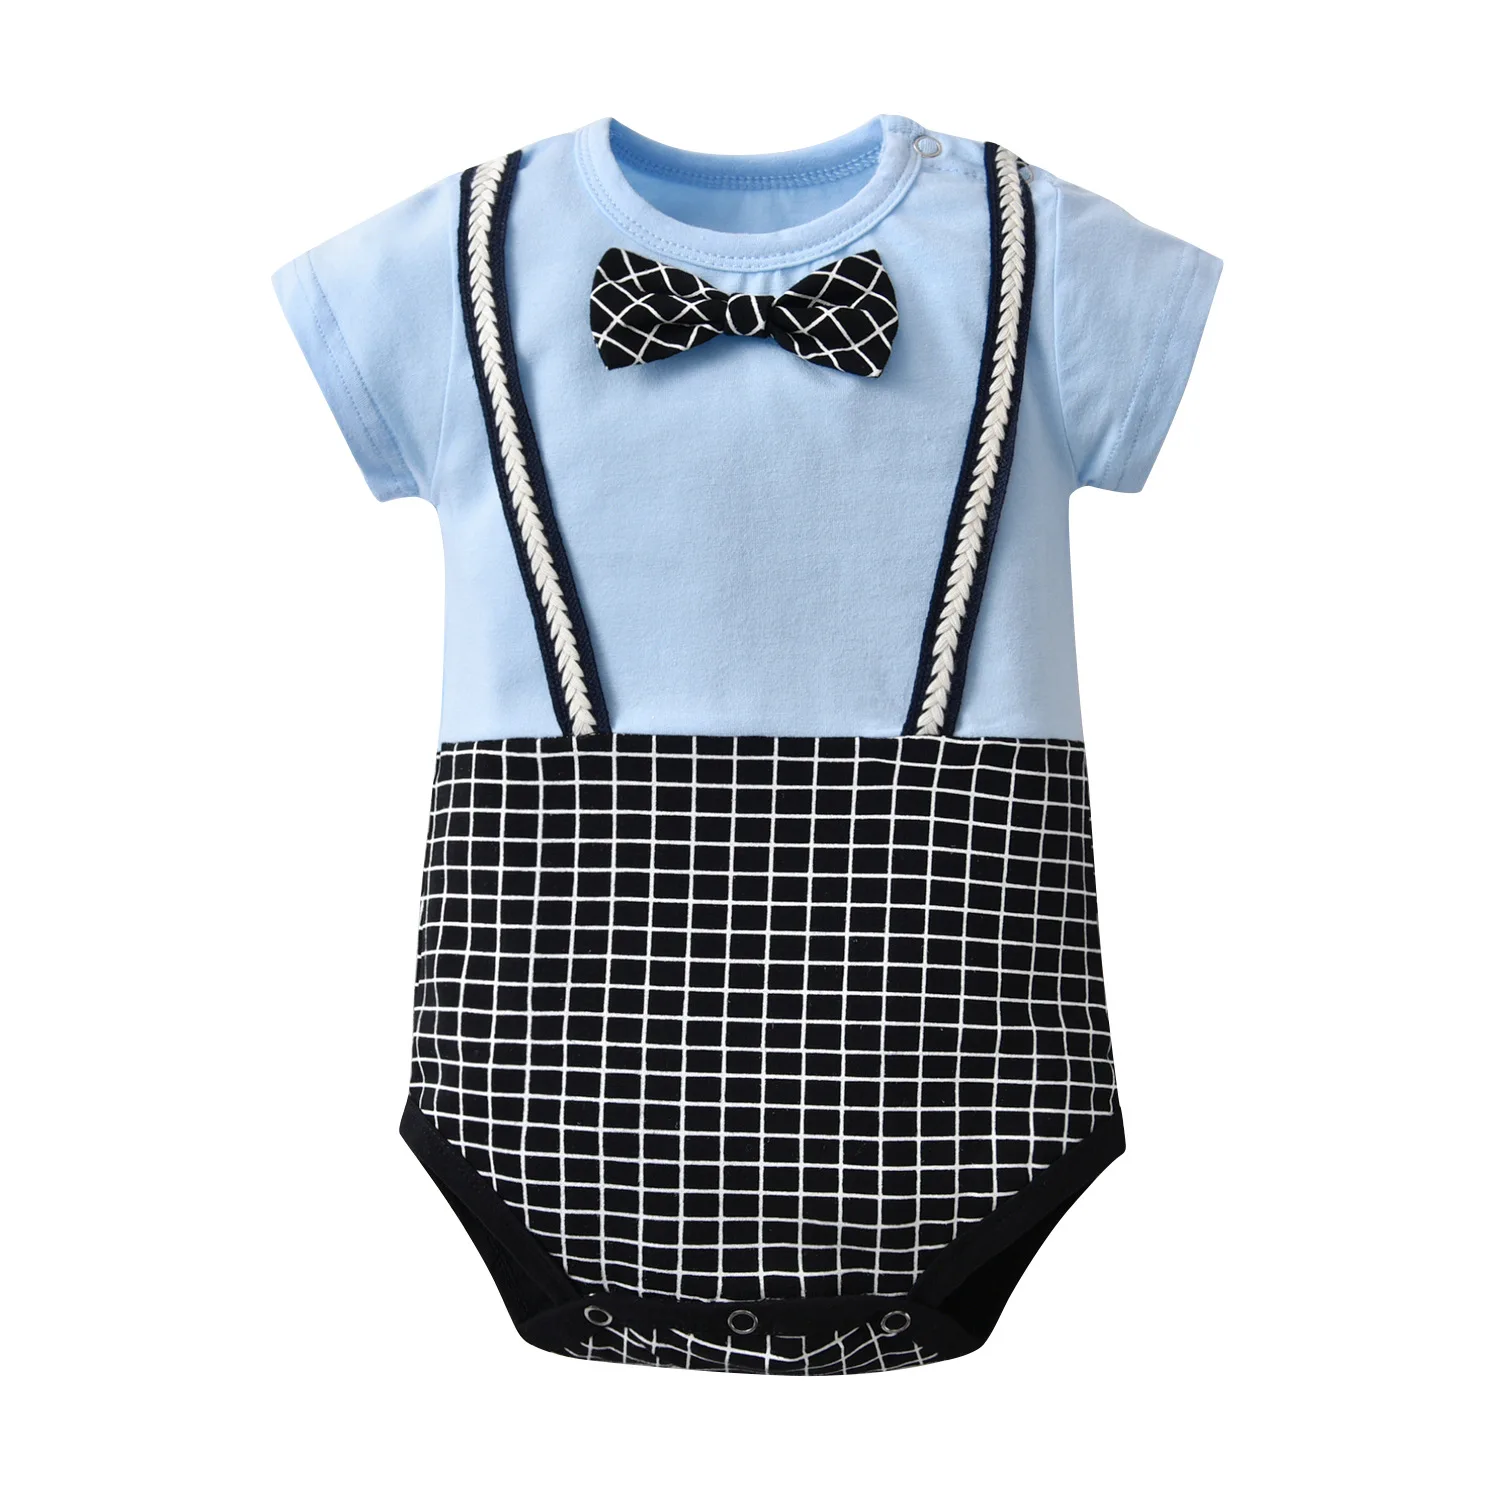 Children's Clothing Newborn Baby Clothing Baby Boy Gentleman One Piece Romper Triangle Fart Clothes Rompers